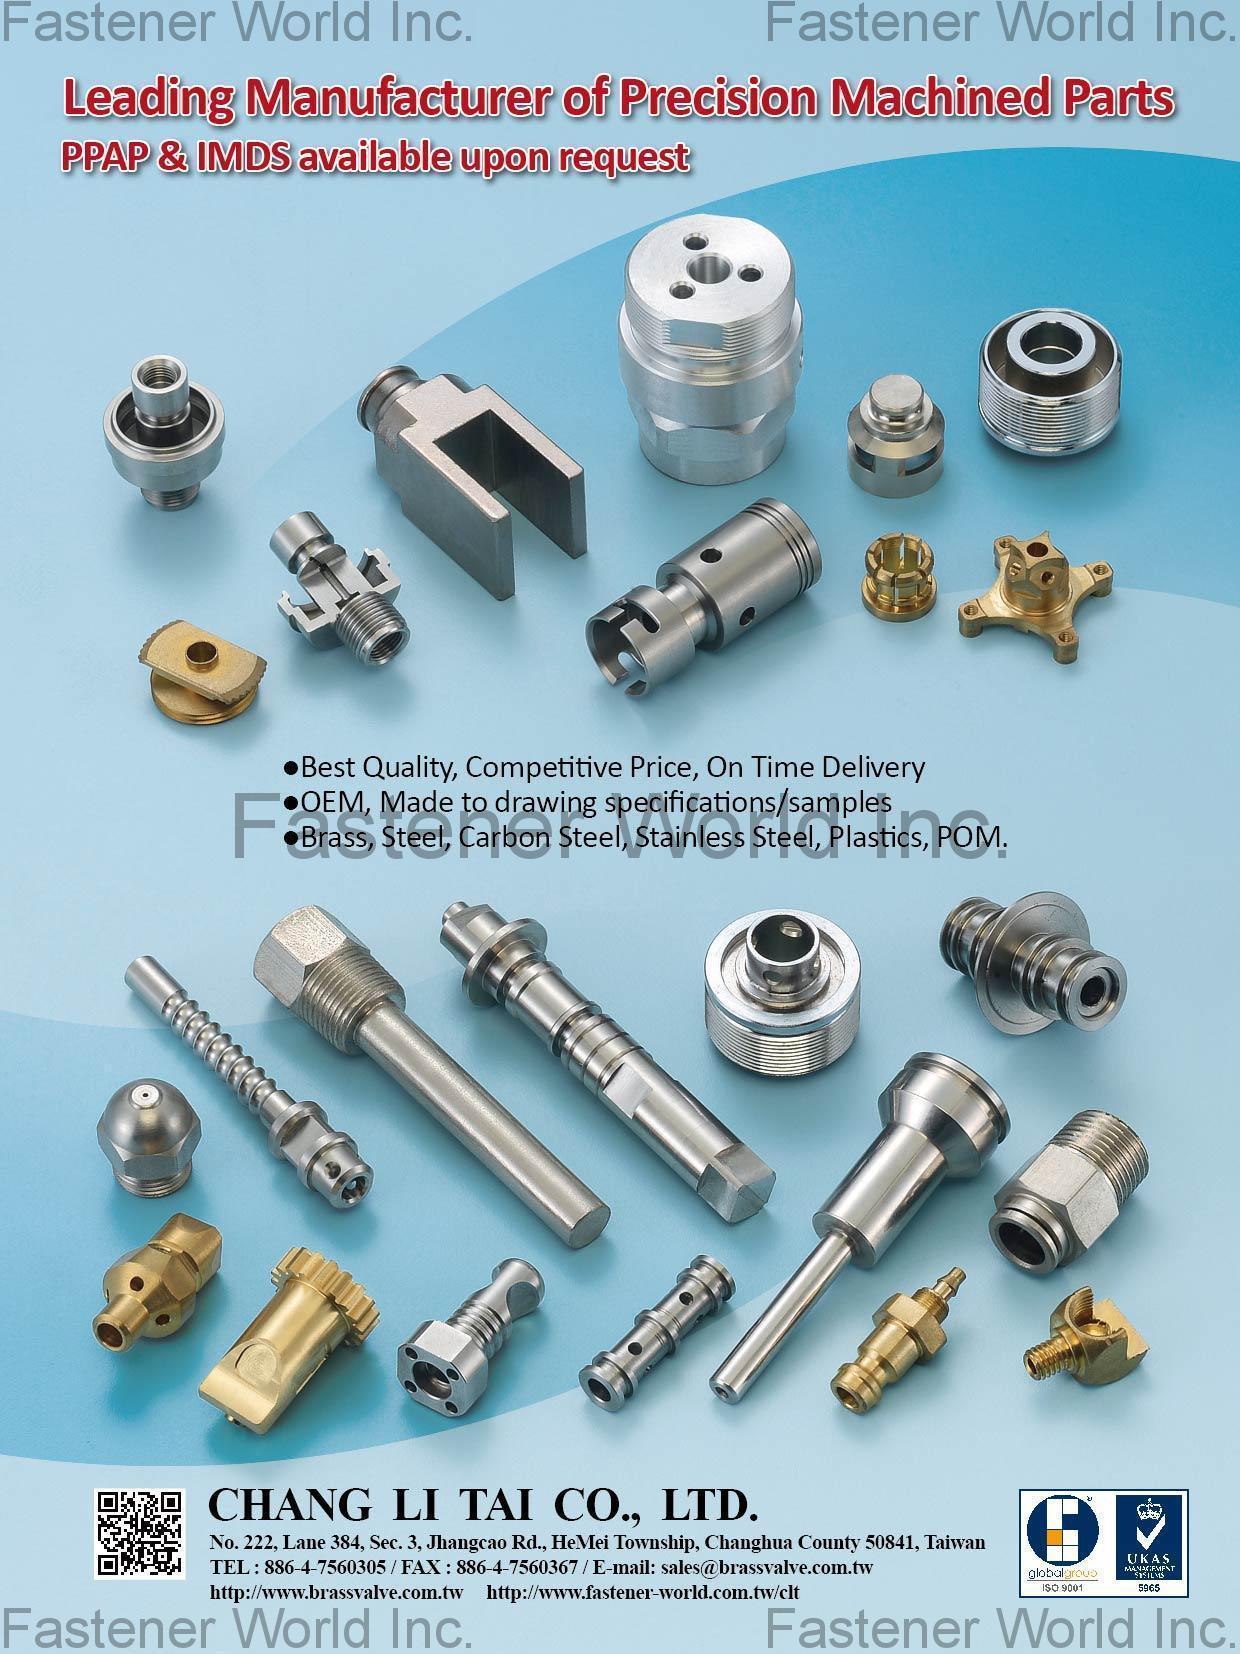 CHANG LI TAI CO., LTD. , Precision Machined Parts, Brass, Stainless Steel, Steel, Carbon Steel, Aluminum, Zinc, Plastics, PoM. OEM/ODM orders are welcome.  , Cnc Machining Parts